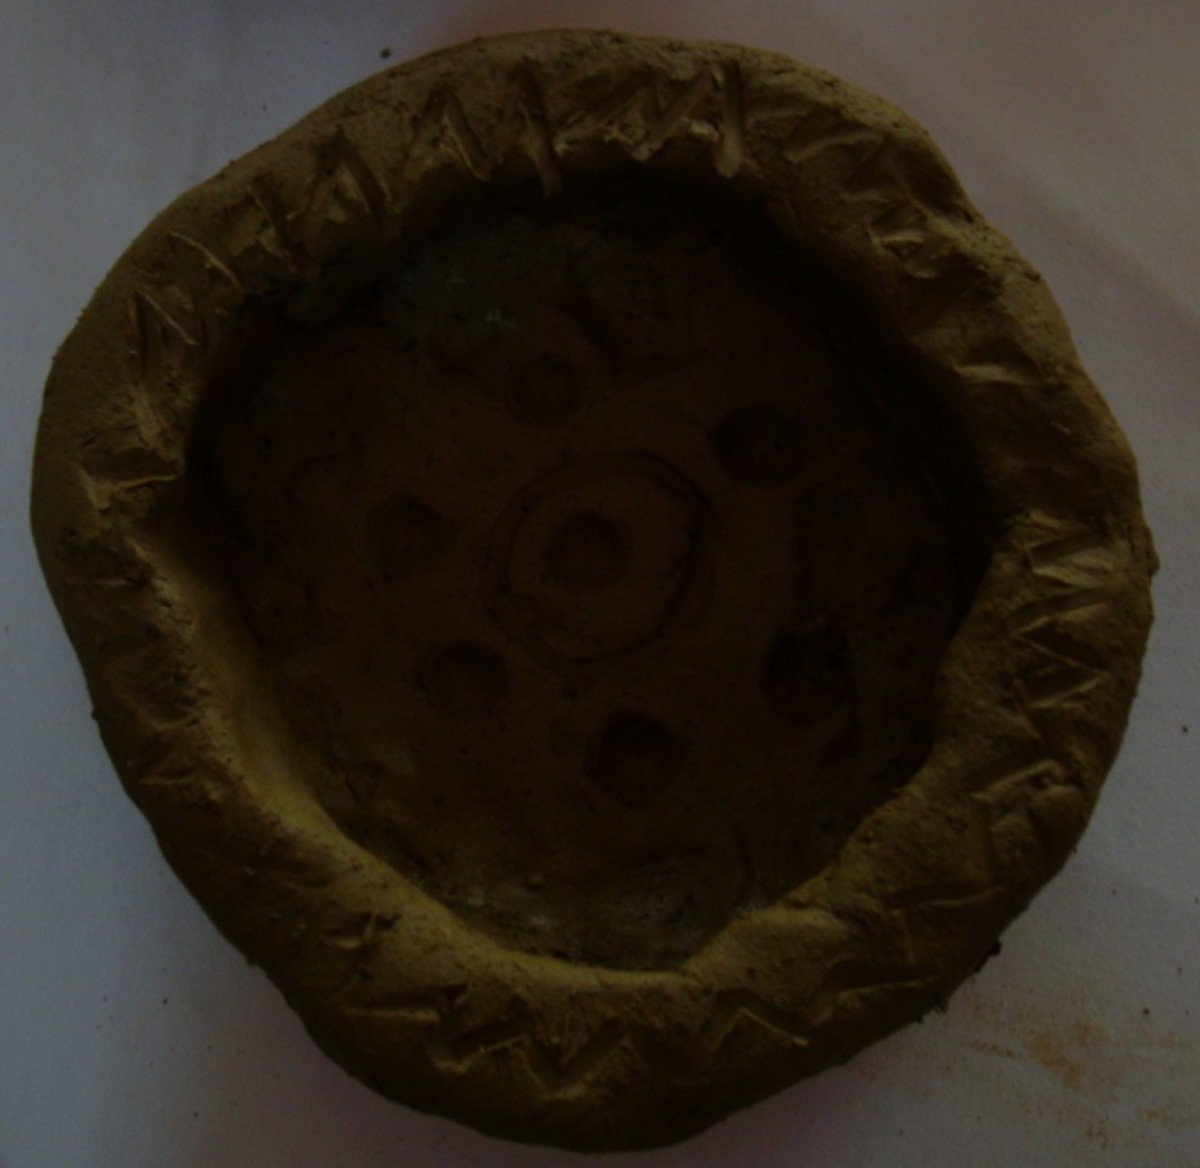 Detail inside and outside the pot